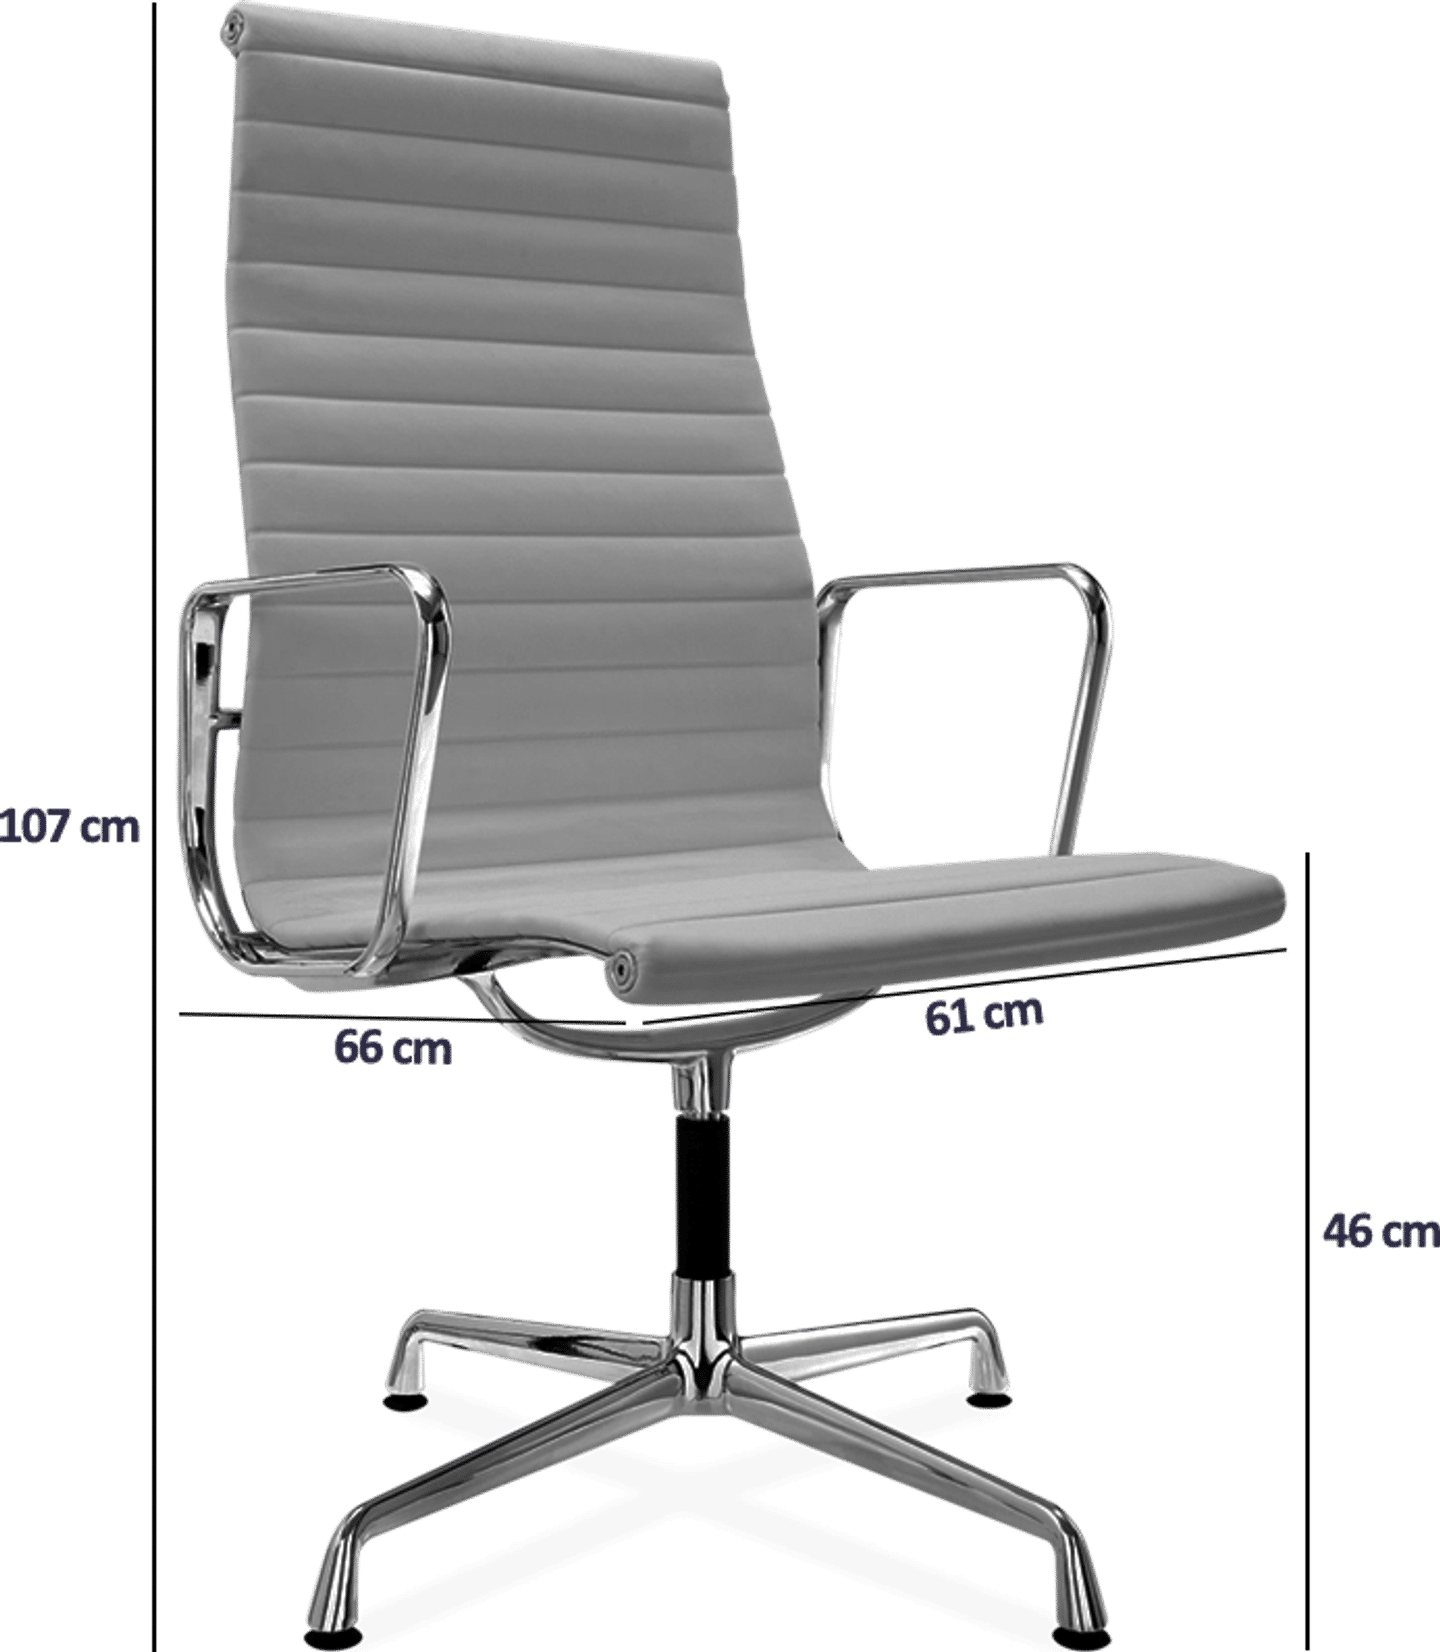 Eames Style Office Chair EA109 Leather Black image.